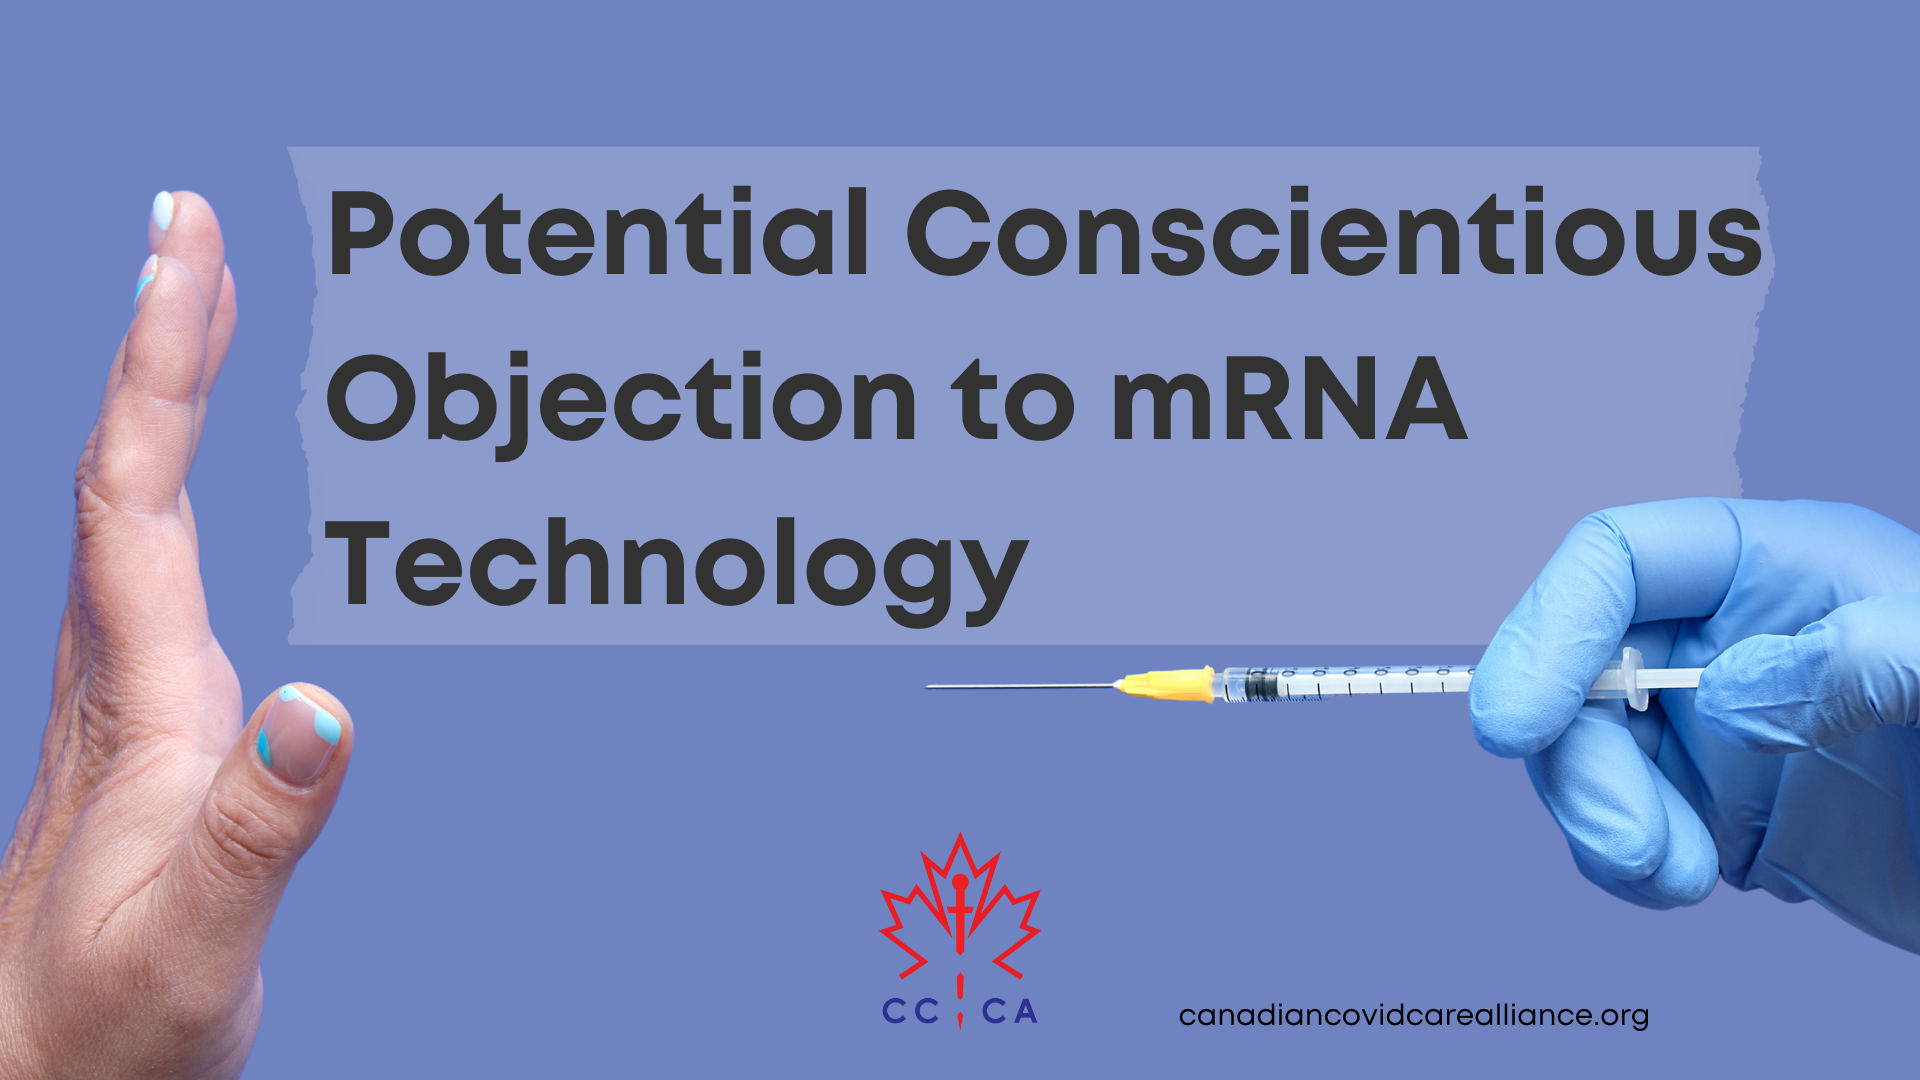 Potential Conscientious Objection to mRNA Technology as Preventive Treatment for COVID-19